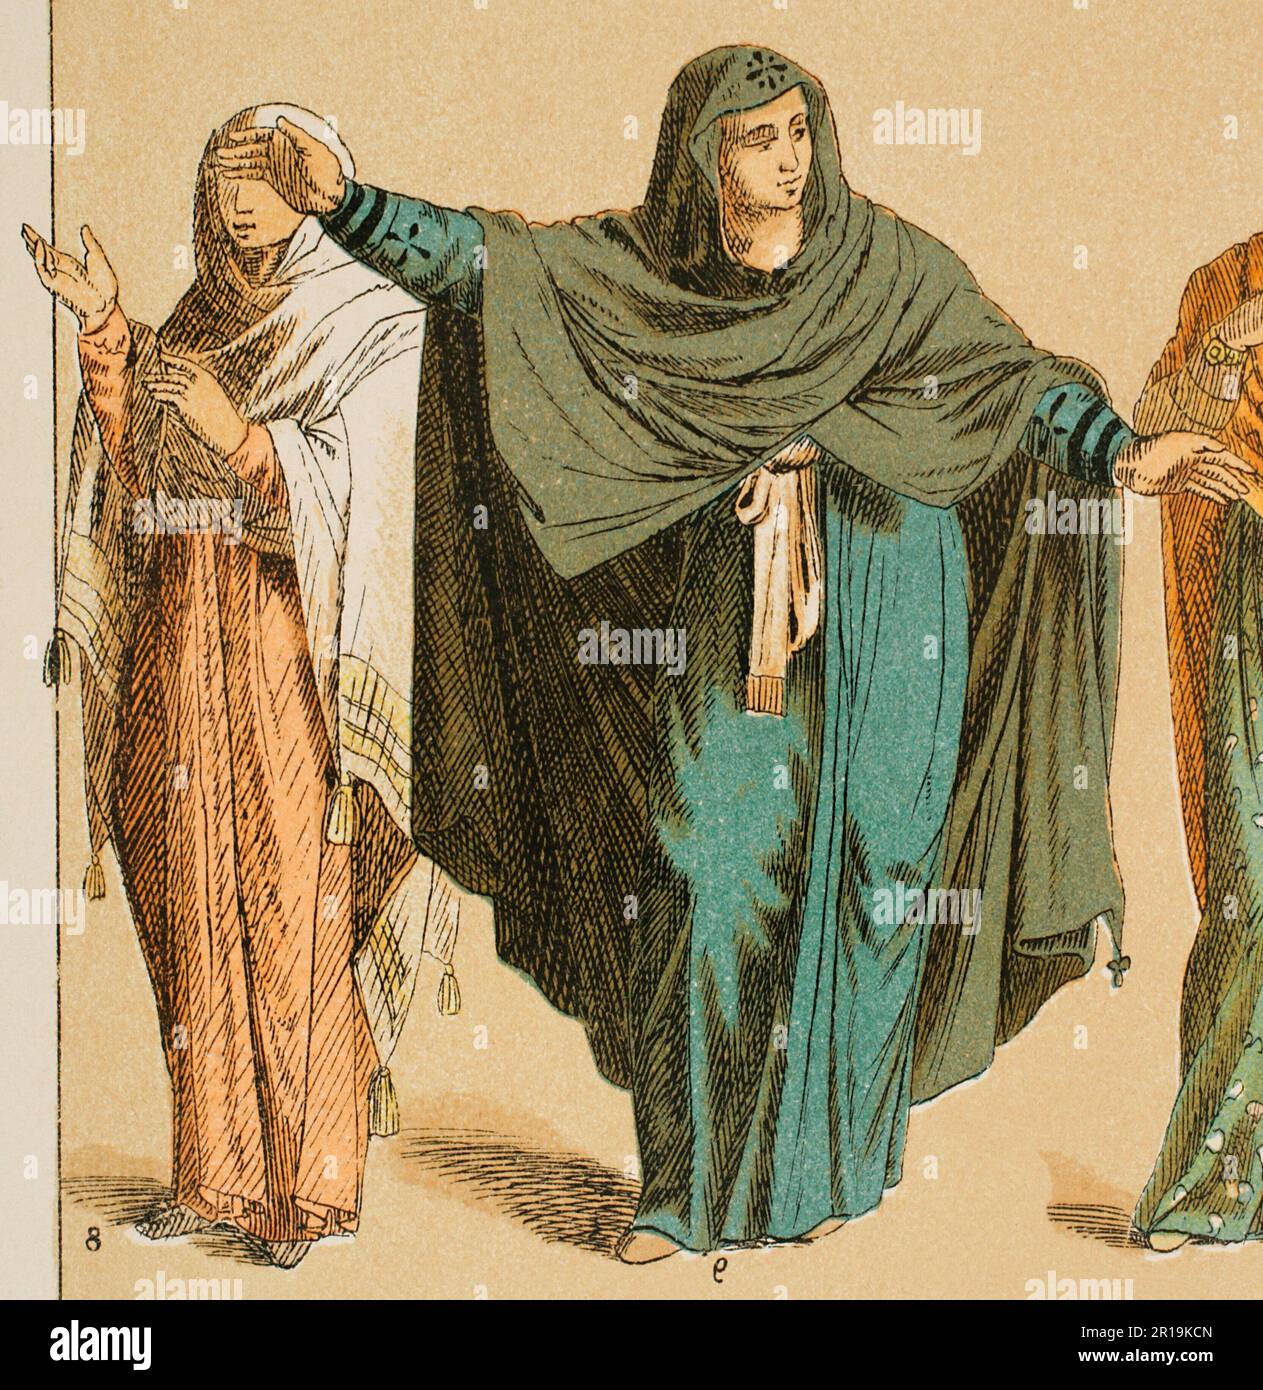 Eastern Roman Empire. Byzantines (400-600). Women's dress with long tunic. Chromolithography. 'Historia Universal', by César Cantú. Volume III, 1882. Stock Photo